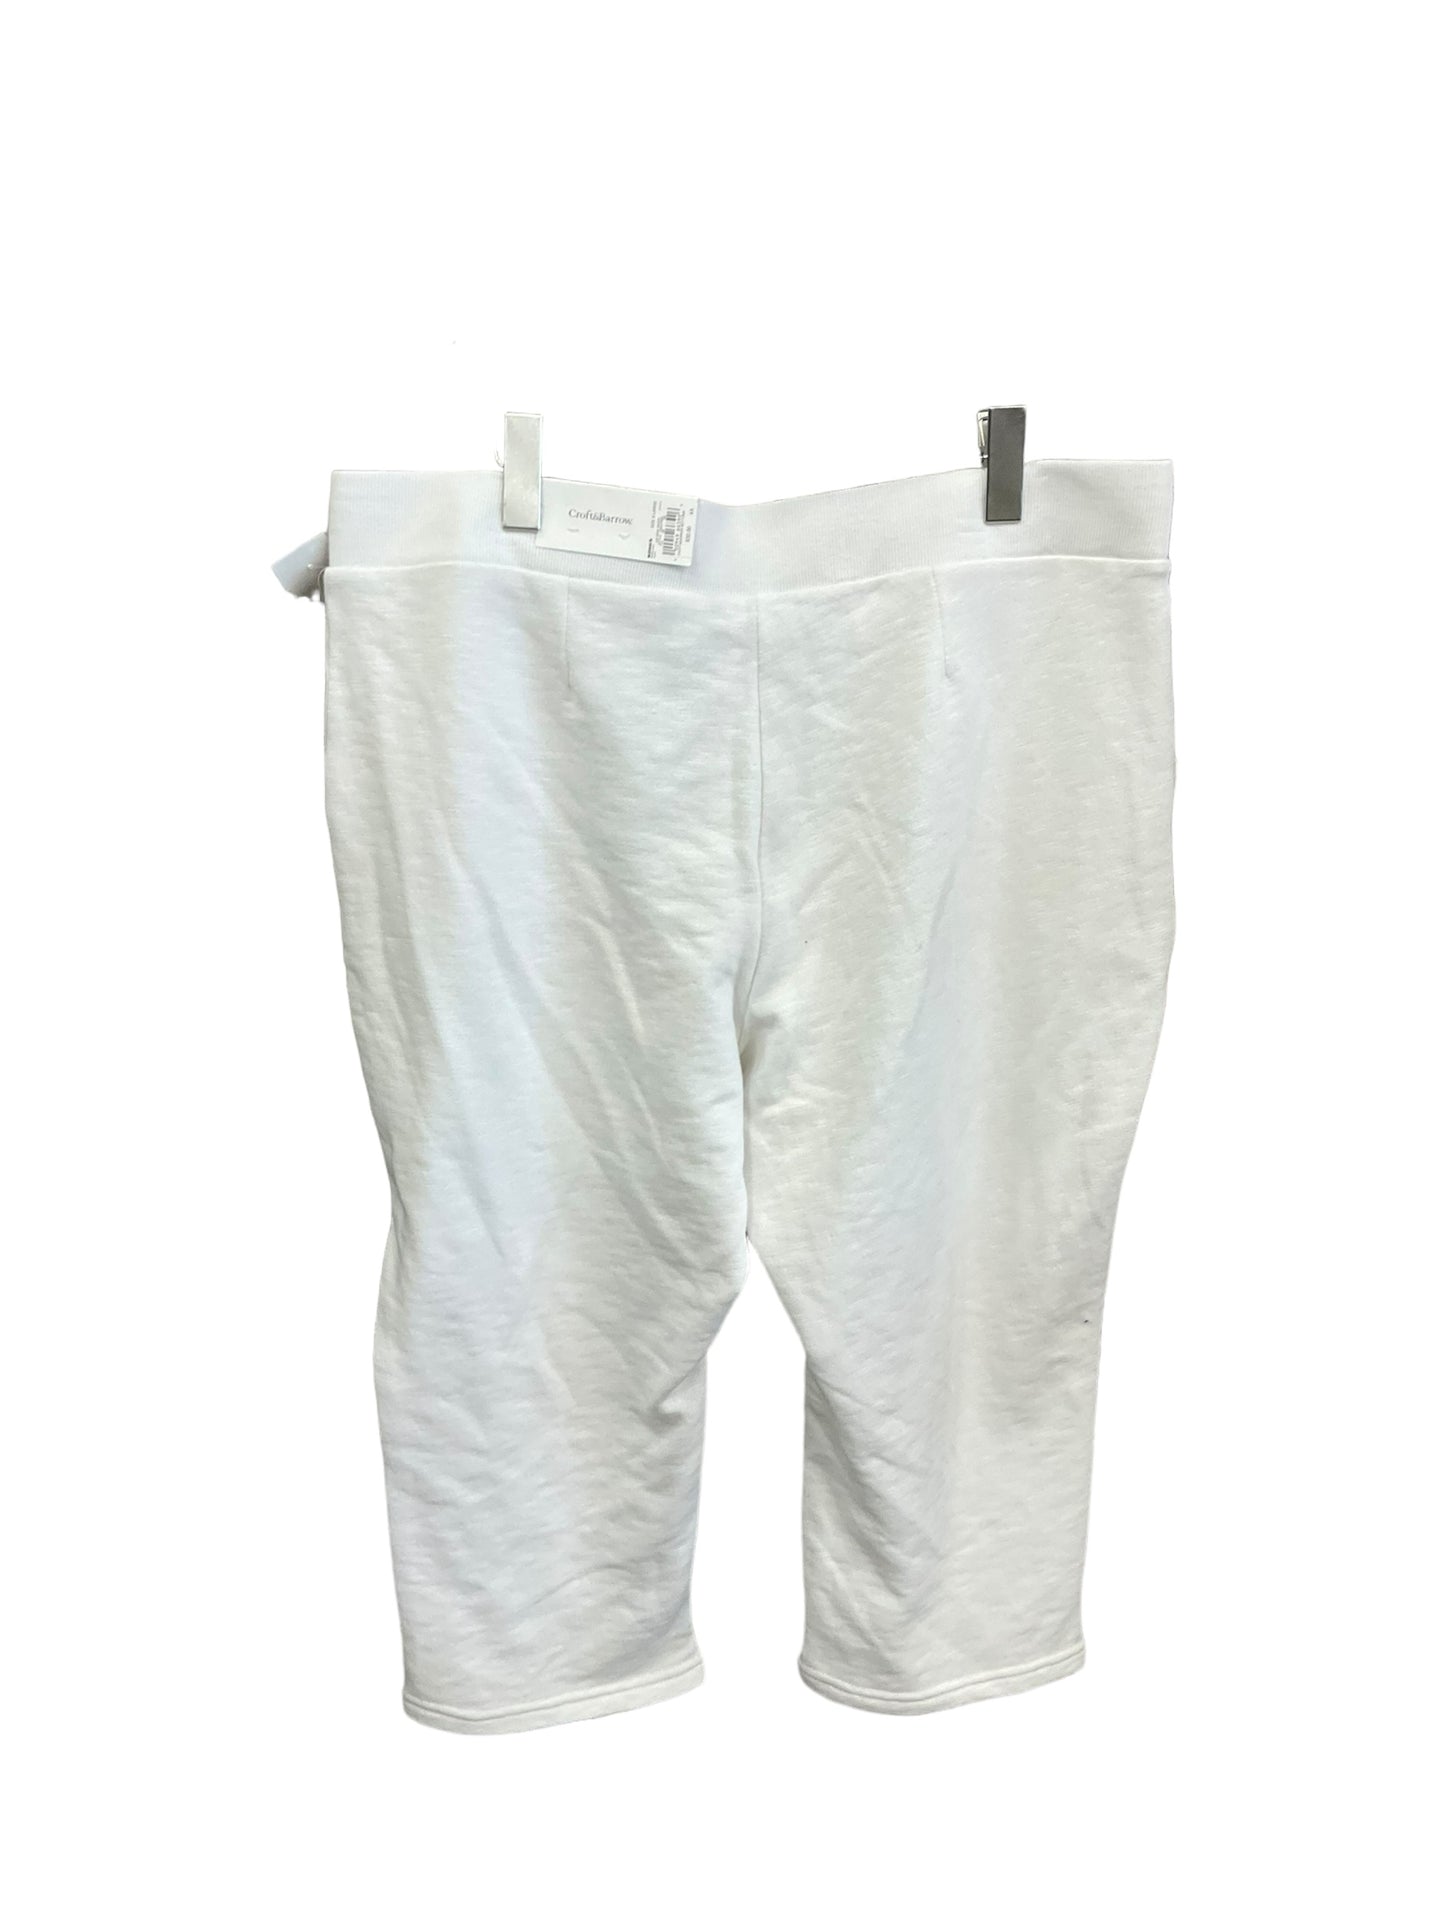 Capris By Croft And Barrow  Size: 14